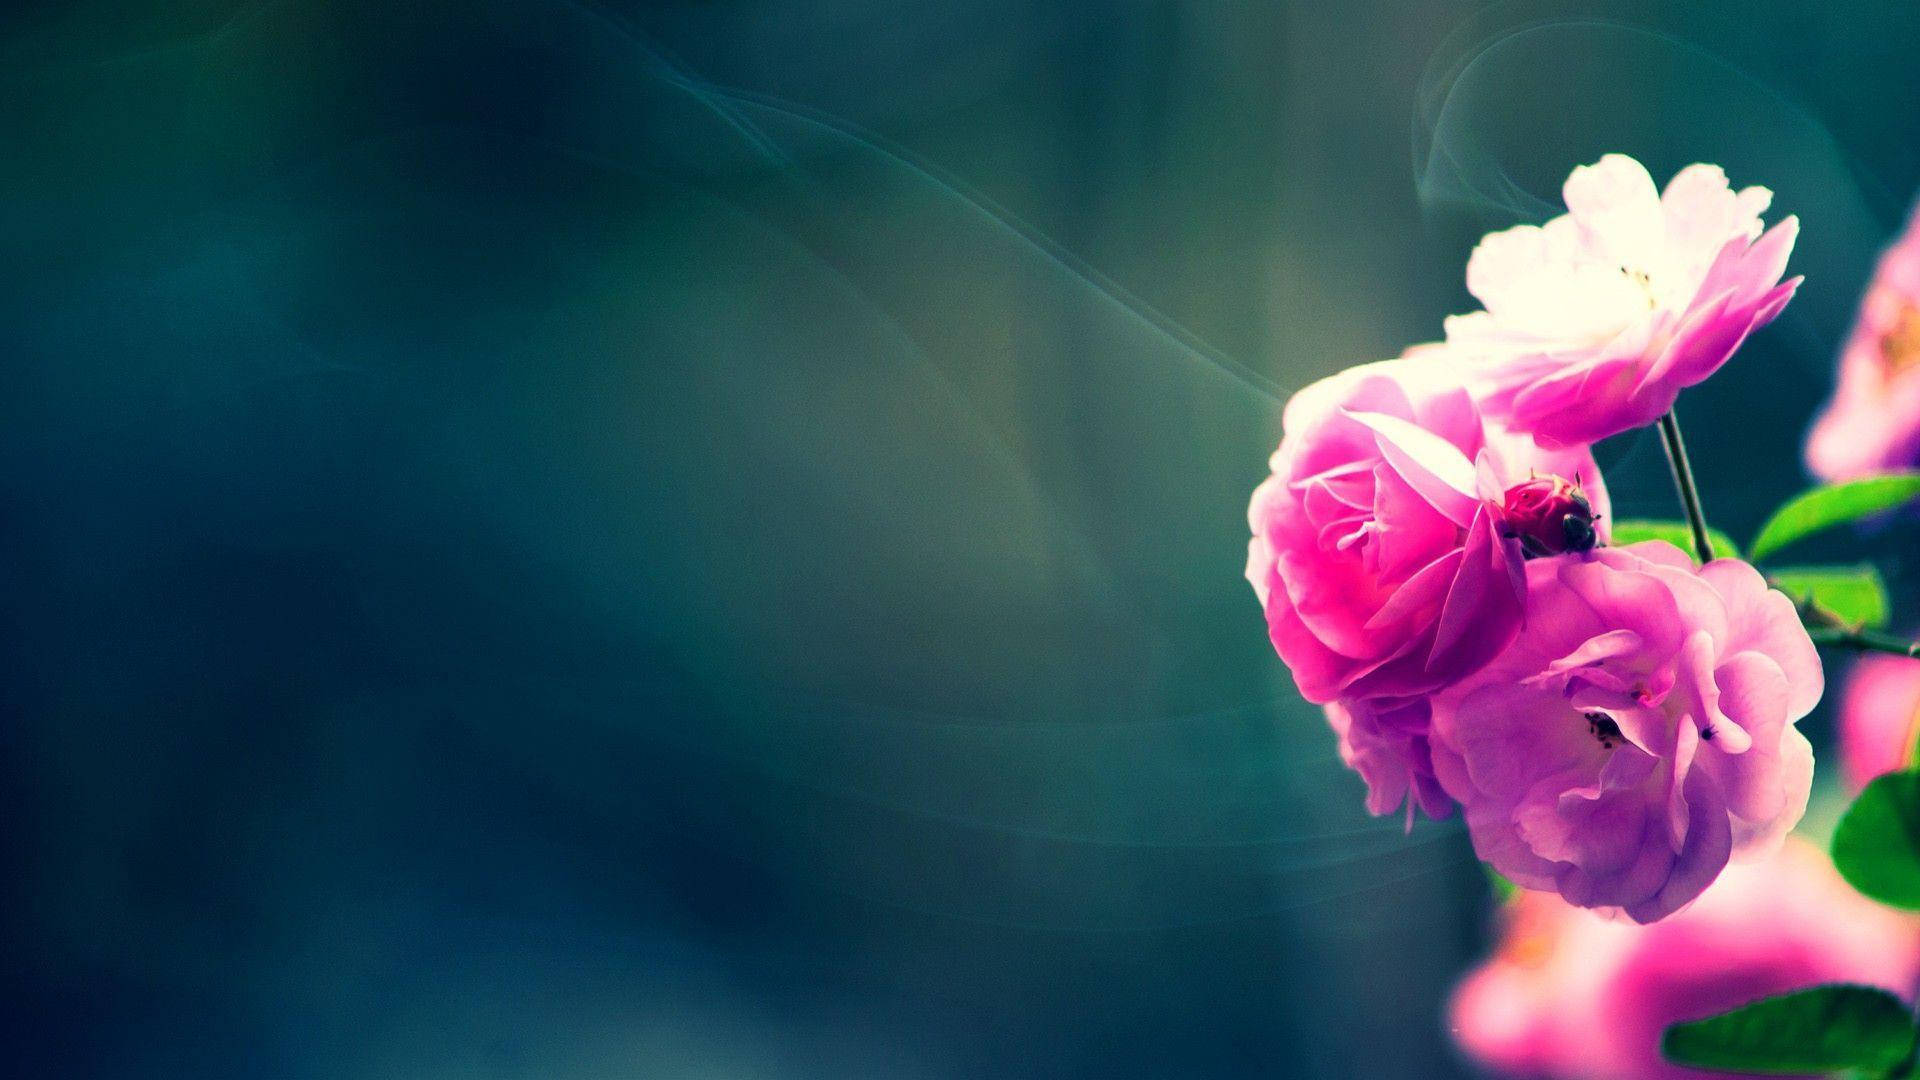 Flower Hd Pink Roses Background